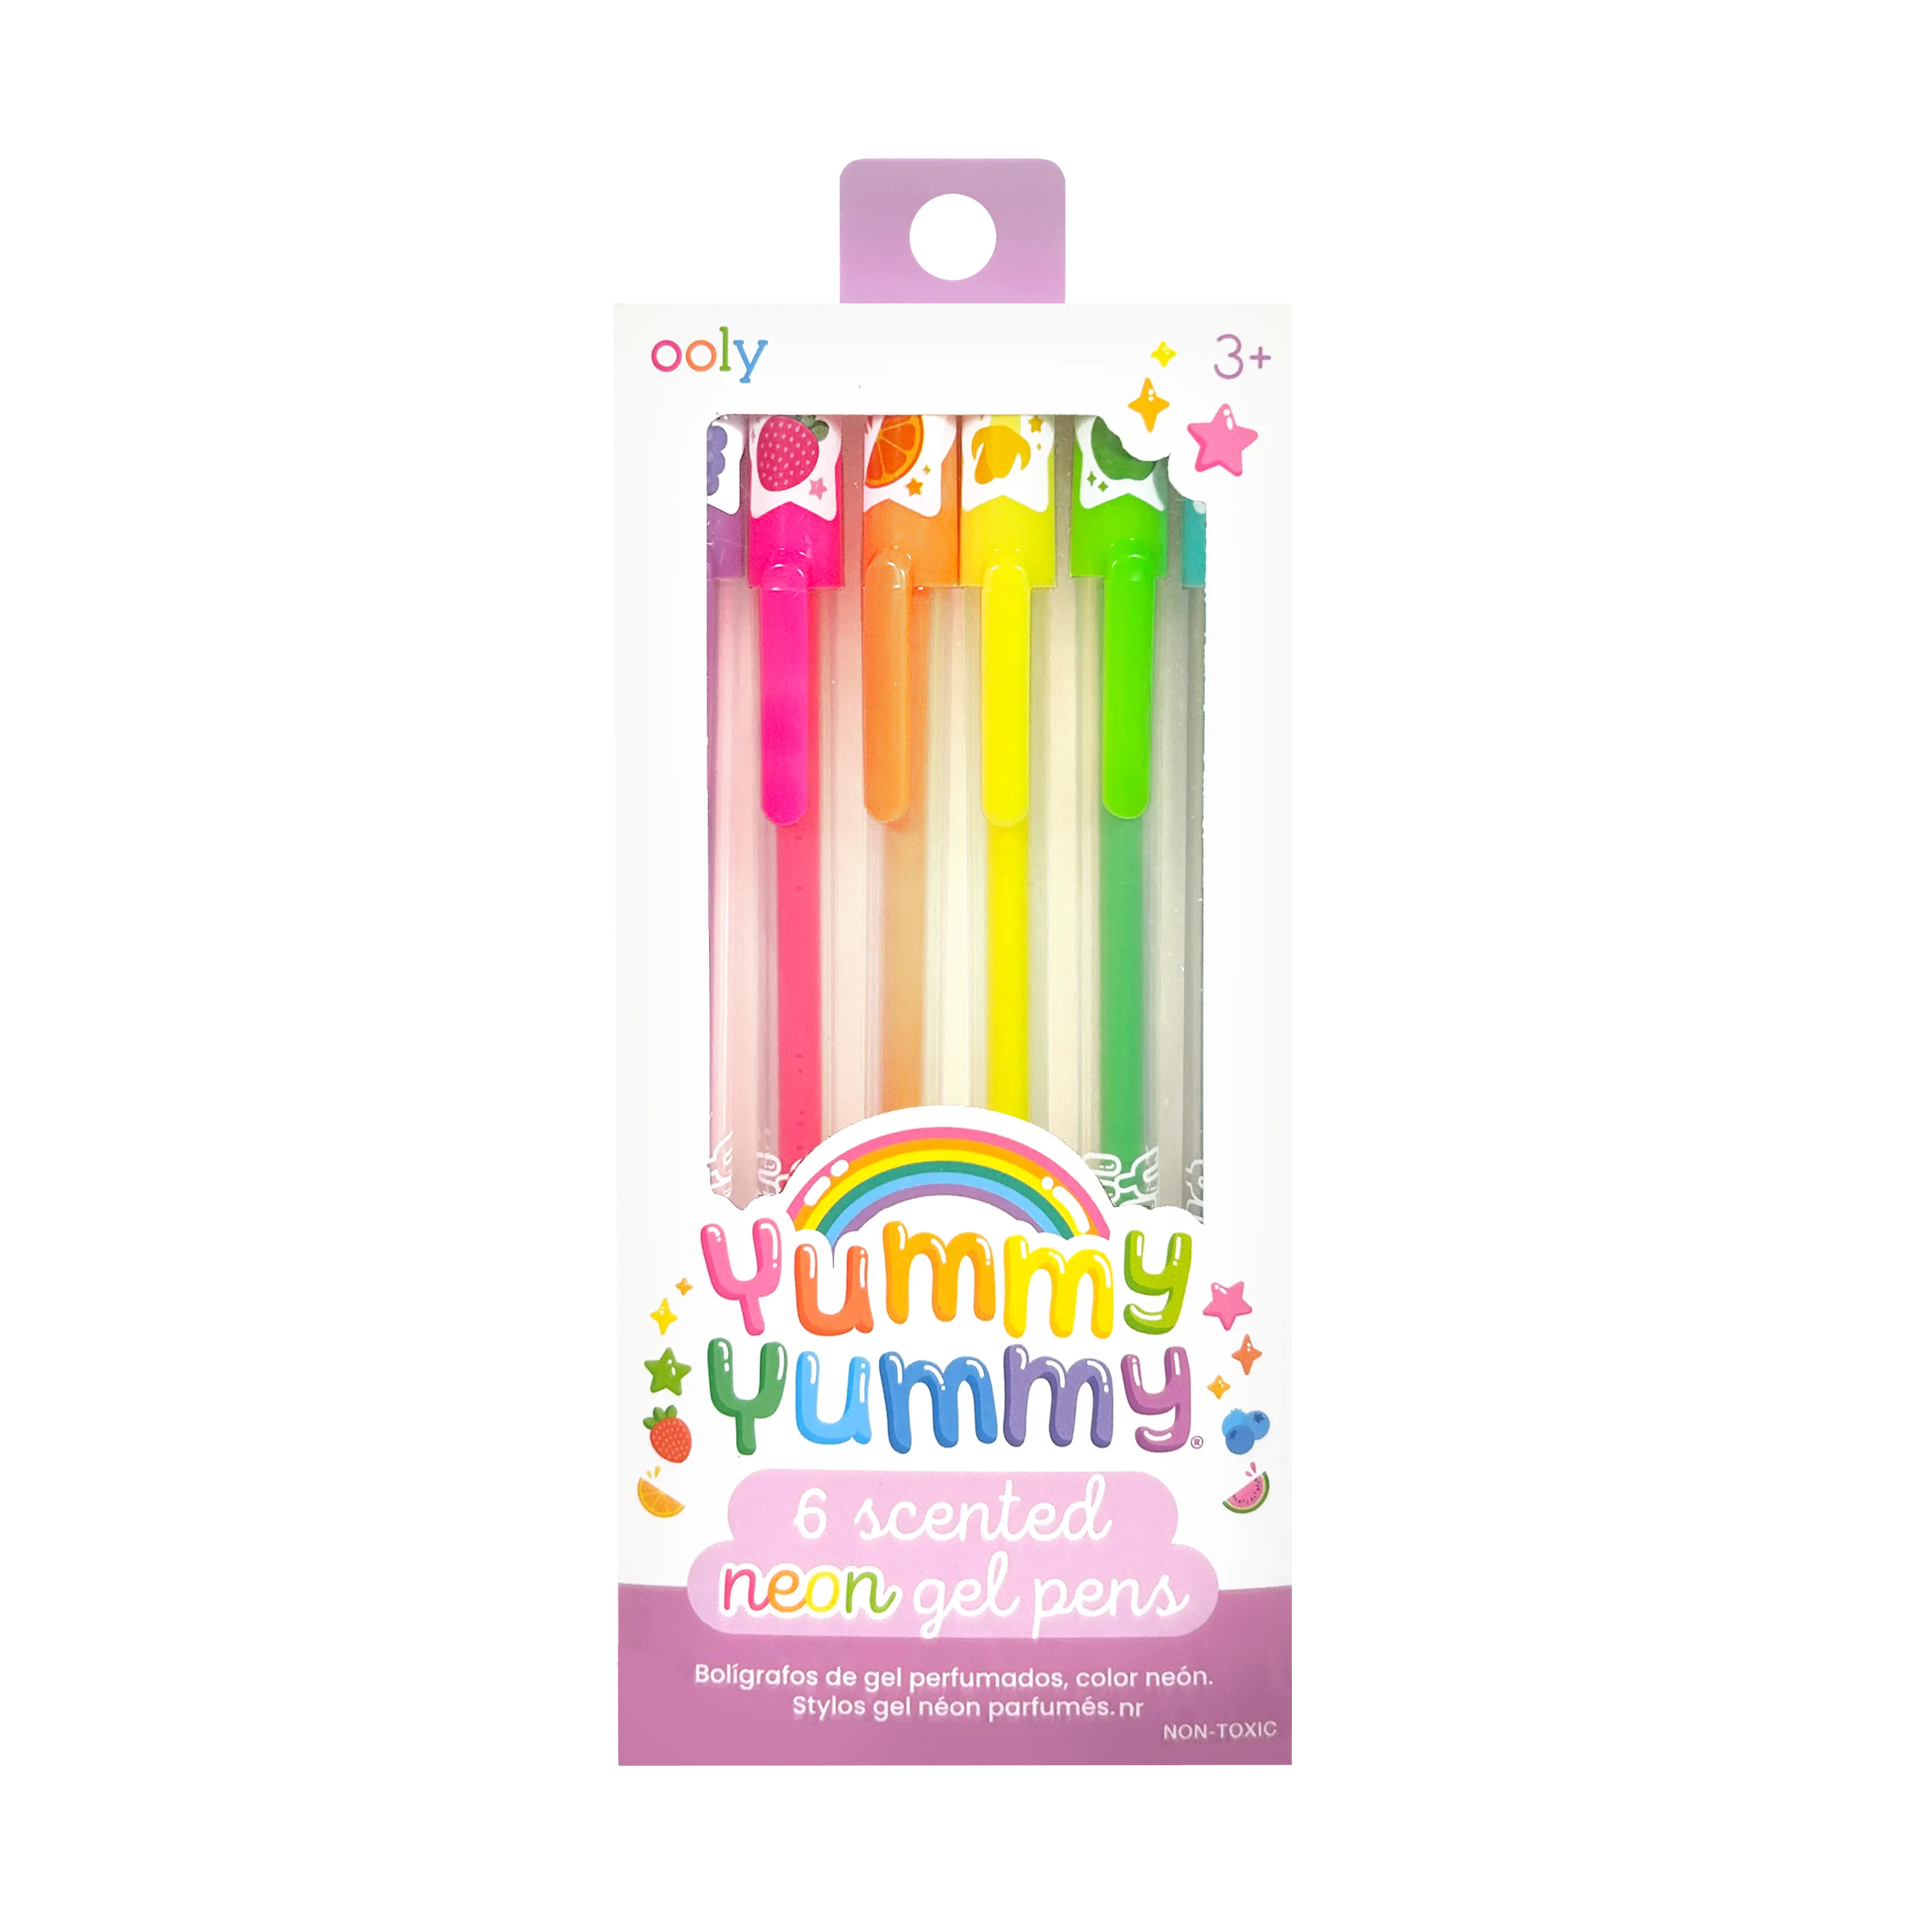 OOLY Yummy Yummy Neon Scented Gel Pens front of packaging